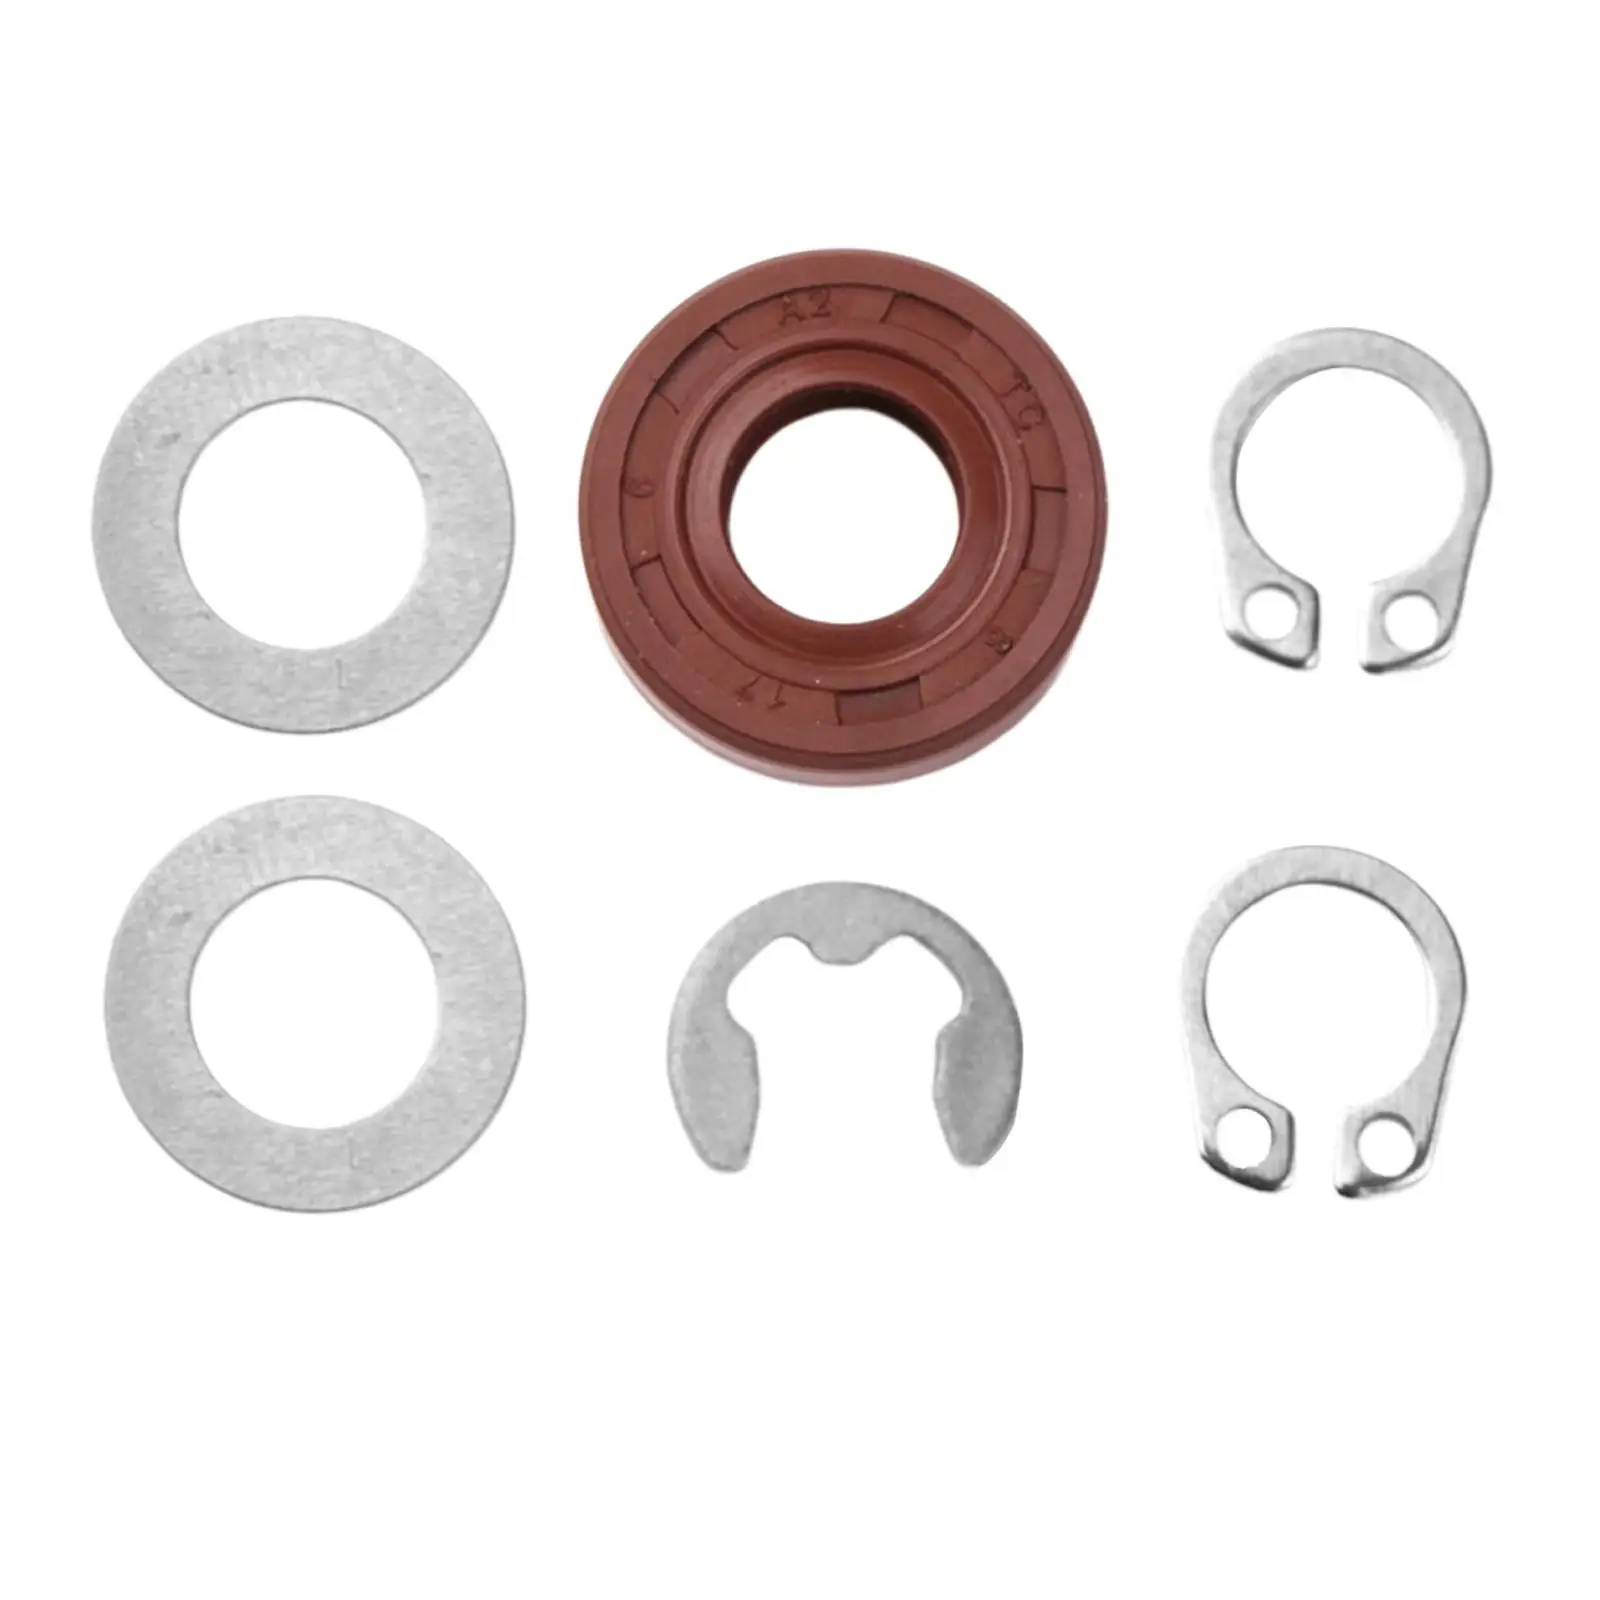 Bread Machine Seal set Kitchen Helper Easy to Install Wearable Bread Maker Replacement Parts for Cbk-100 Bread Maker Accessories